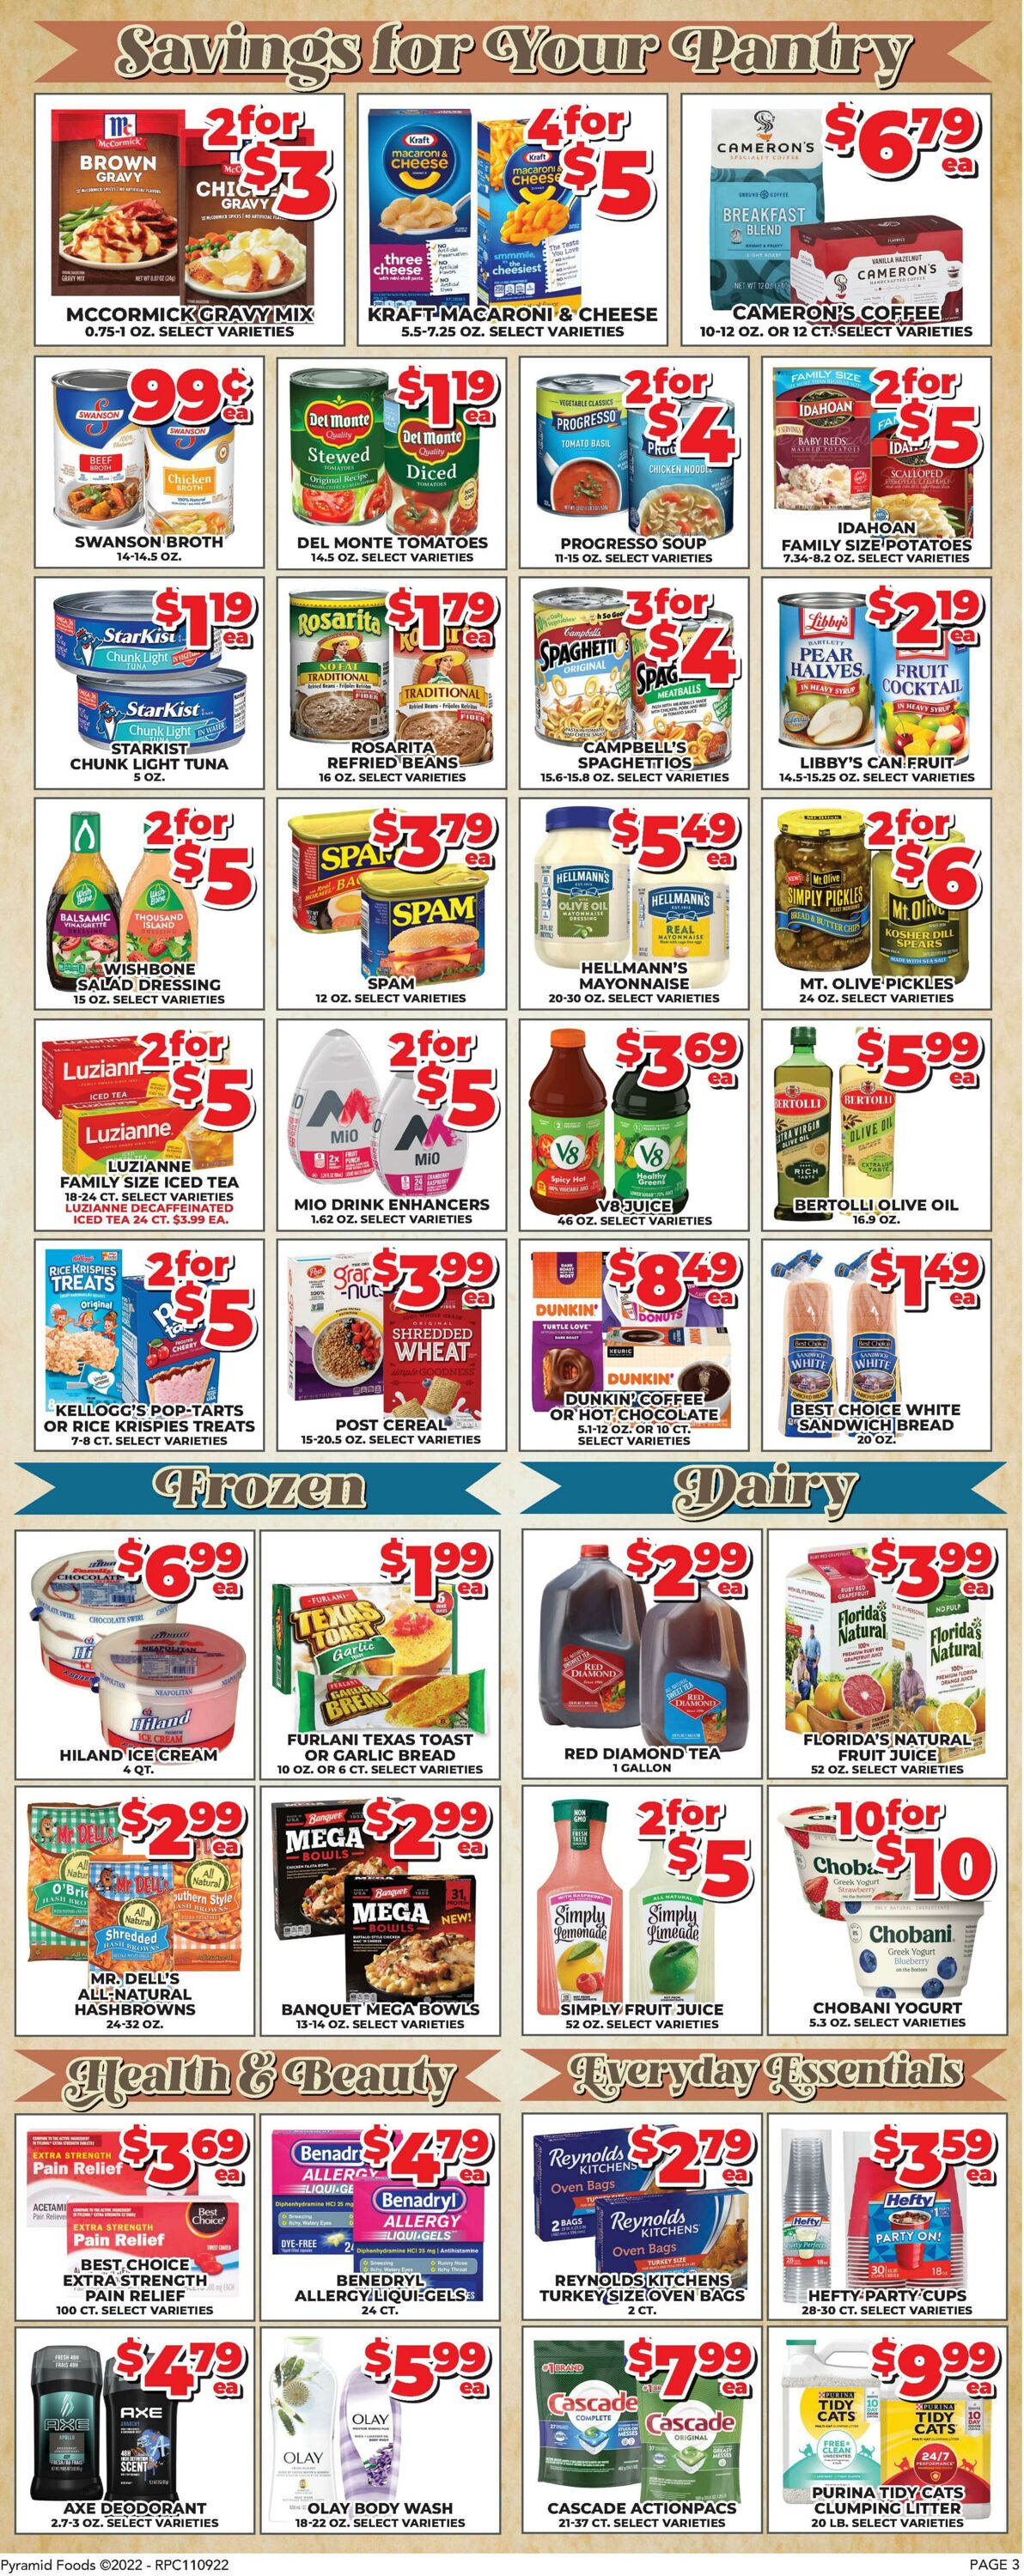 Weekly ad Price Cutter 11/09/2022 - 11/15/2022